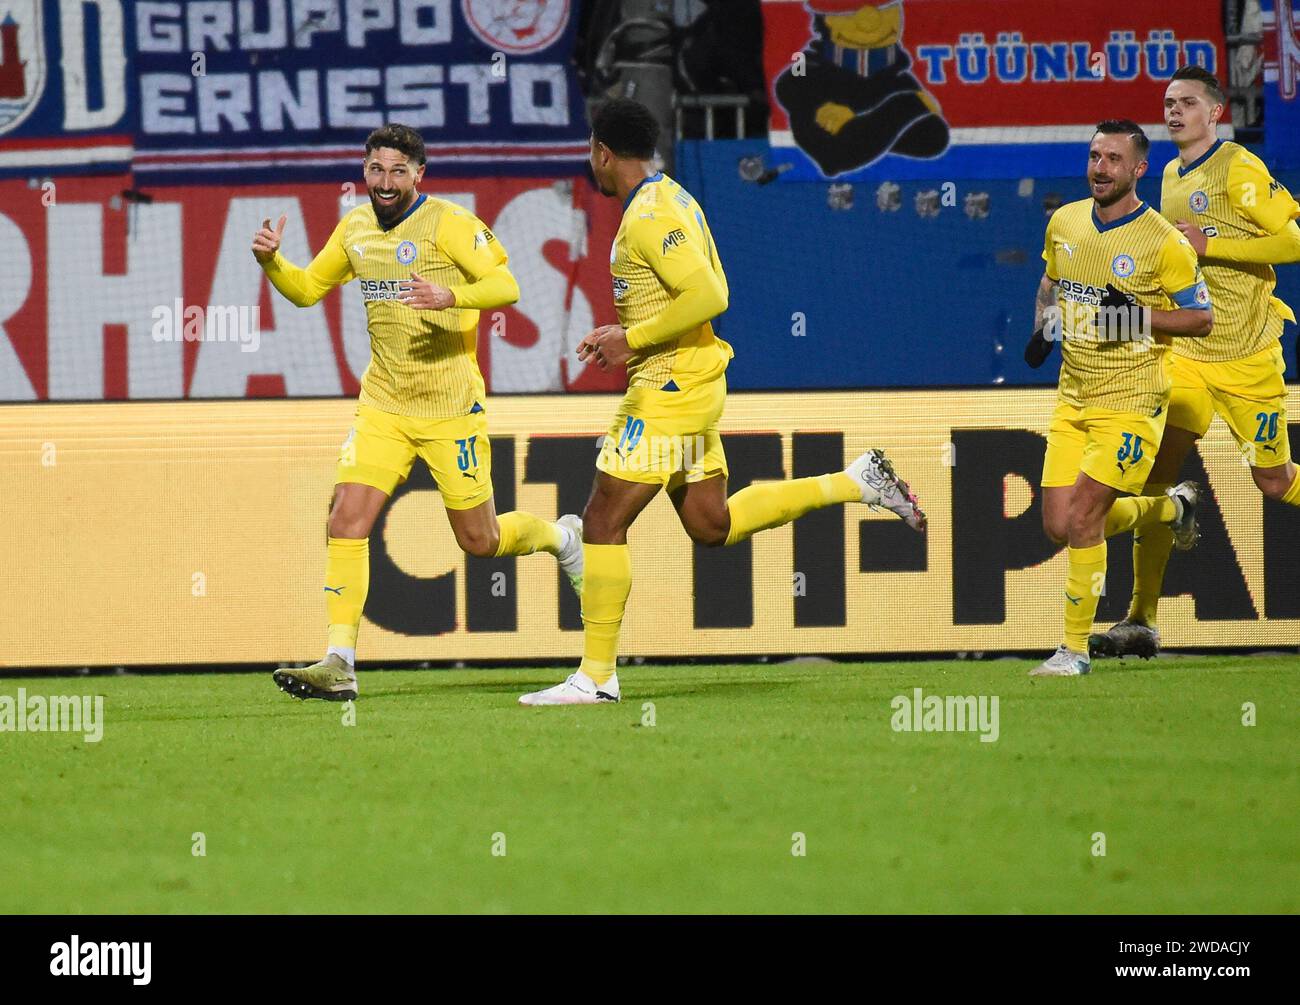 Kiel, Germany. 19th Jan, 2024. Soccer: Bundesliga 2, Holstein Kiel - Eintracht Braunschweig, Matchday 18, Holstein Stadium. Braunschweig players celebrate after Fabio Kaufmann (left) scores to make it 1:1. Credit: Gregor Fischer/dpa - IMPORTANT NOTE: In accordance with the regulations of the DFL German Football League and the DFB German Football Association, it is prohibited to utilize or have utilized photographs taken in the stadium and/or of the match in the form of sequential images and/or video-like photo series./dpa/Alamy Live News Stock Photo